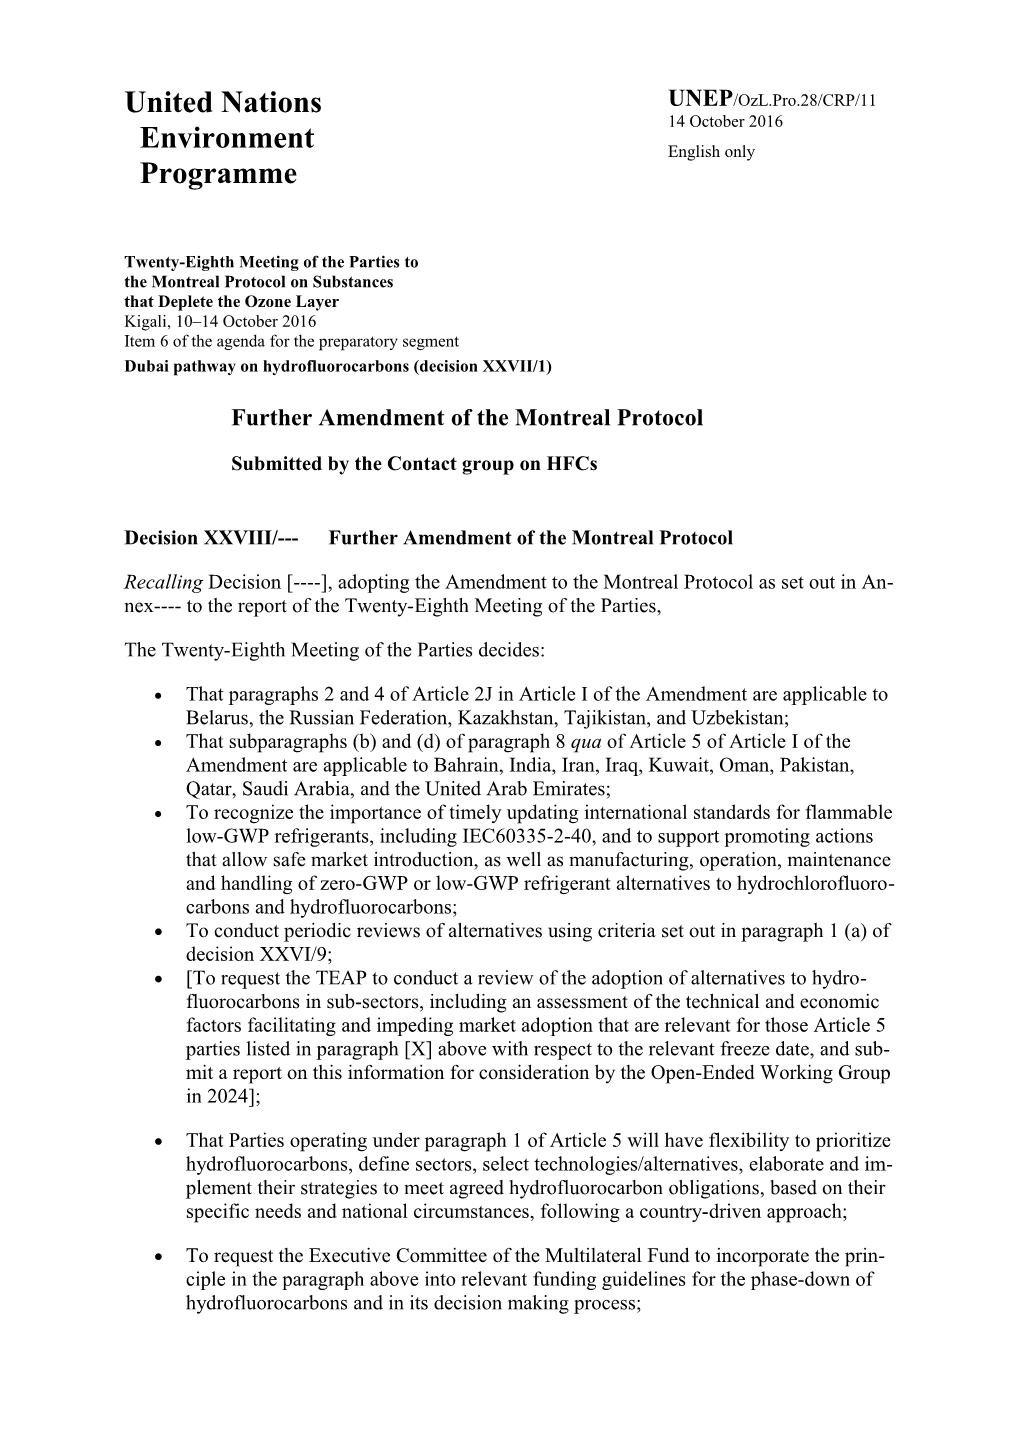 Further Amendment of the Montreal Protocol : Submitted by the Contact Group on Hfcs